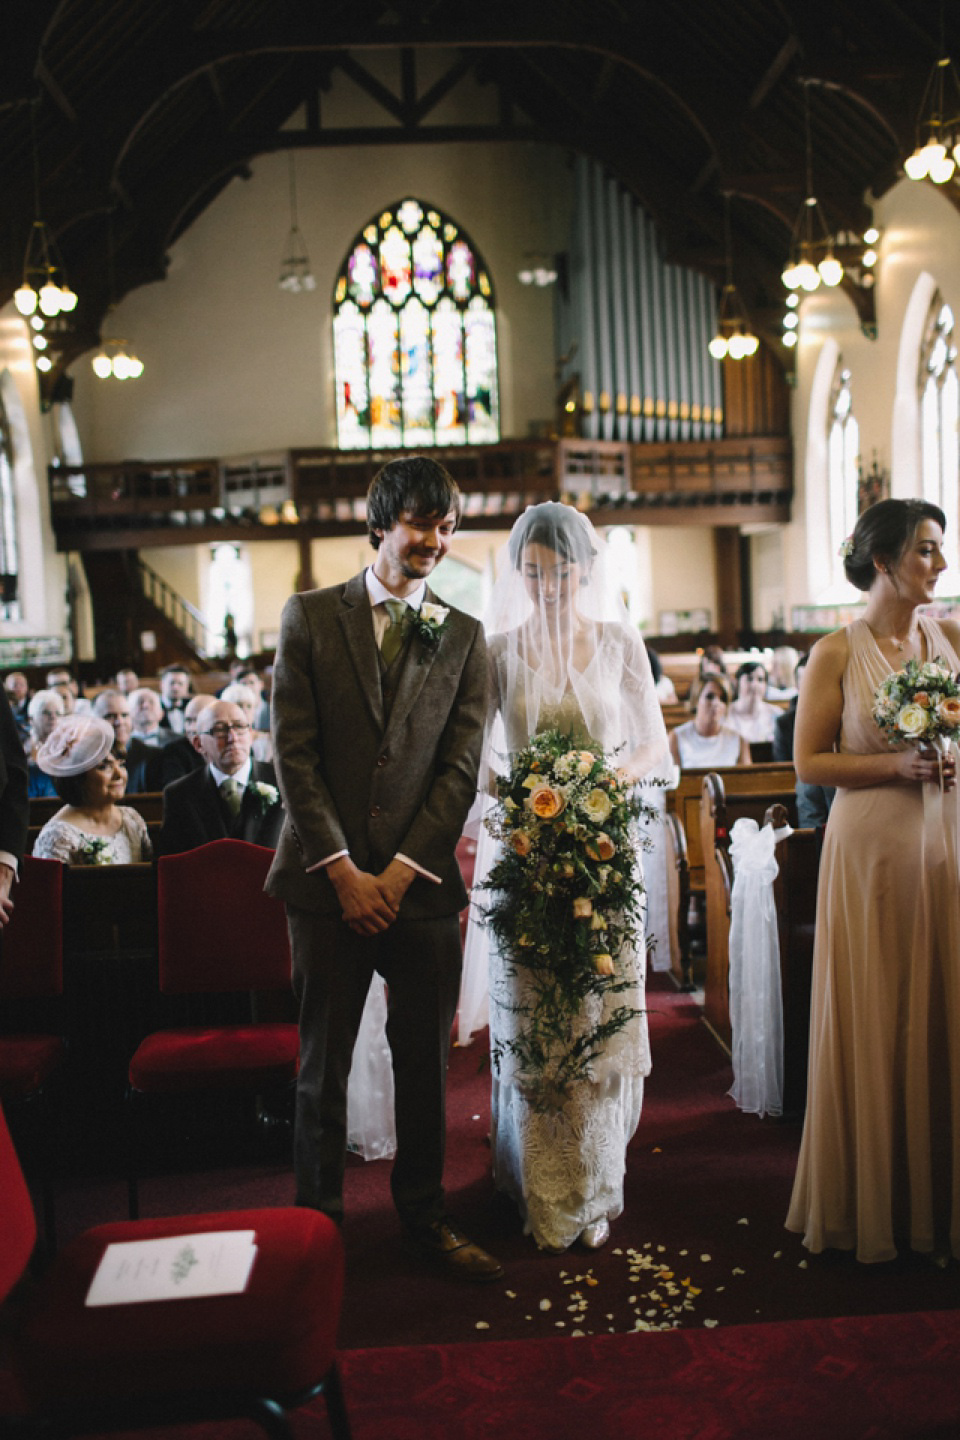 Bride Charlene wears a bespoke gown by Sheffield based designer, Kate Beaumont, for her wedding at Stockport Town Hall. Photography by DSB Creative.